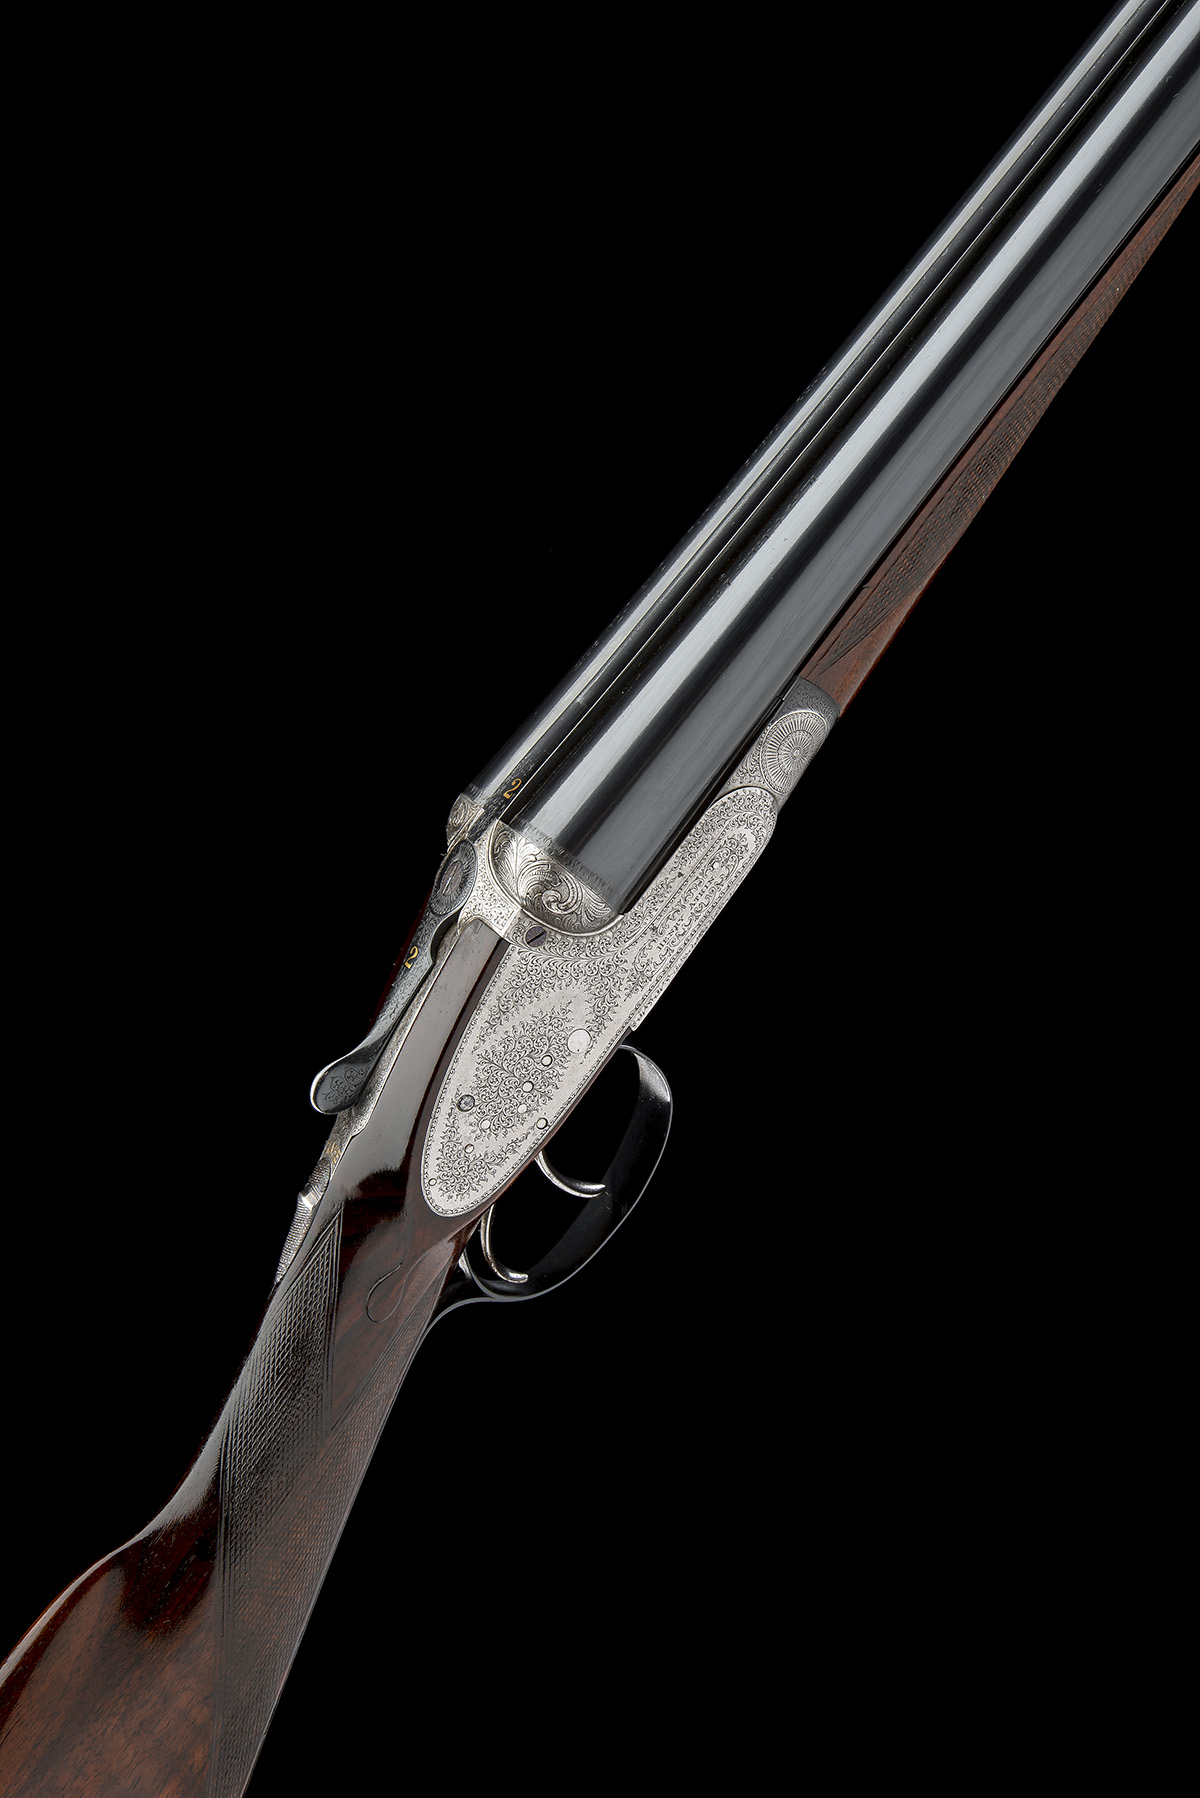 HENRY ATKIN A 12-BORE SIDELOCK EJECTOR, serial no. 508, circa 1895, 28in. replacement nitro barrels,